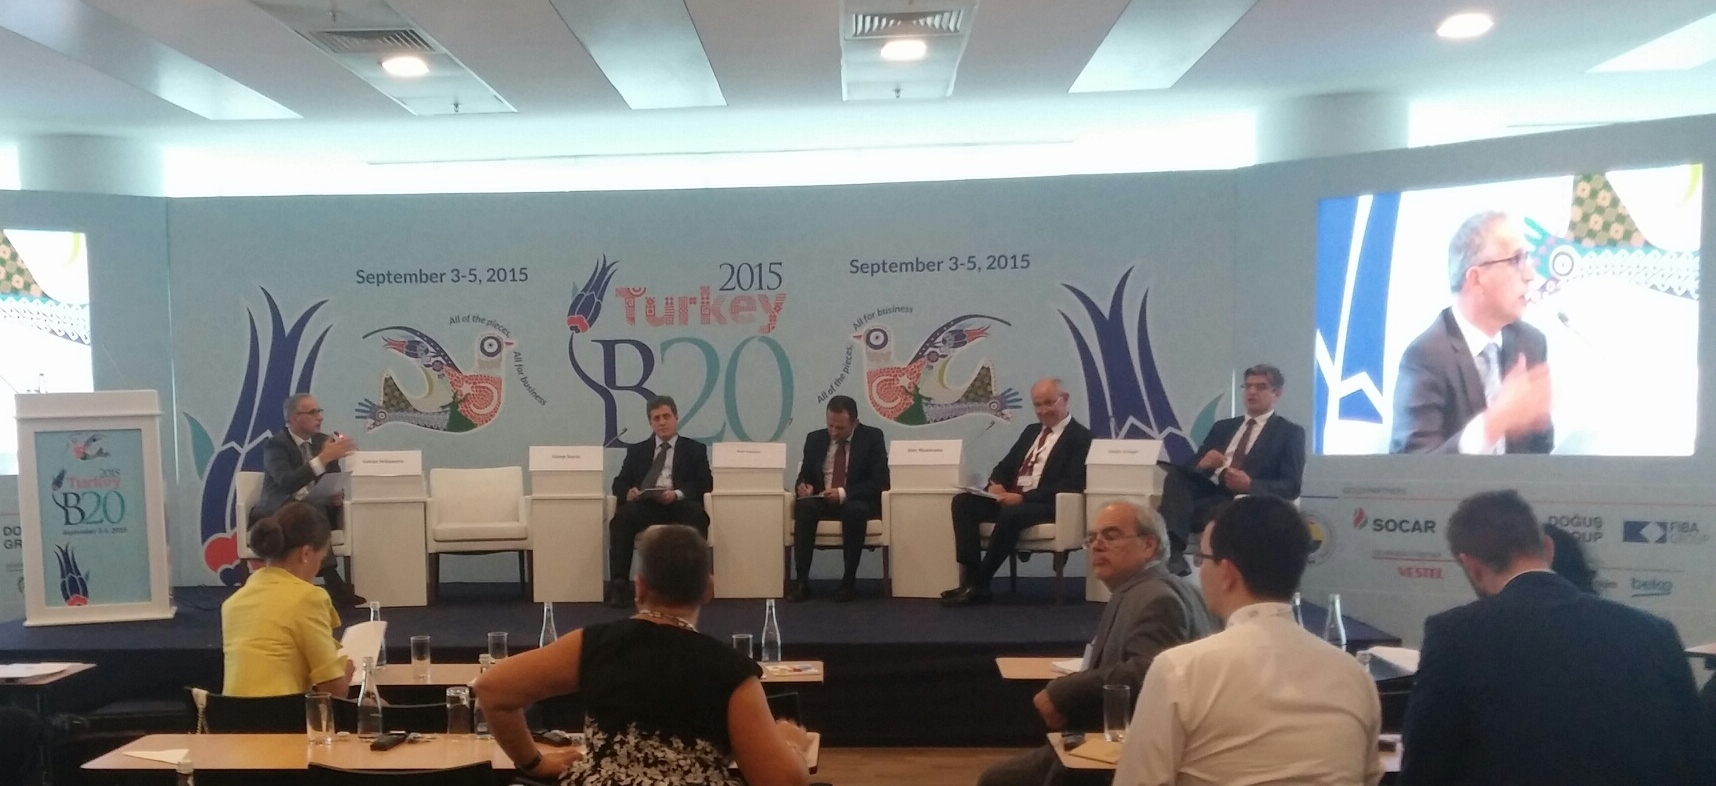 Regional Cooperation Council at the 'Integrating South Eastern Europe to Global Markets' session at B20 Conference in Ankara, Turkey, 3-5 September (Photo: RCC/Ratka Babic)